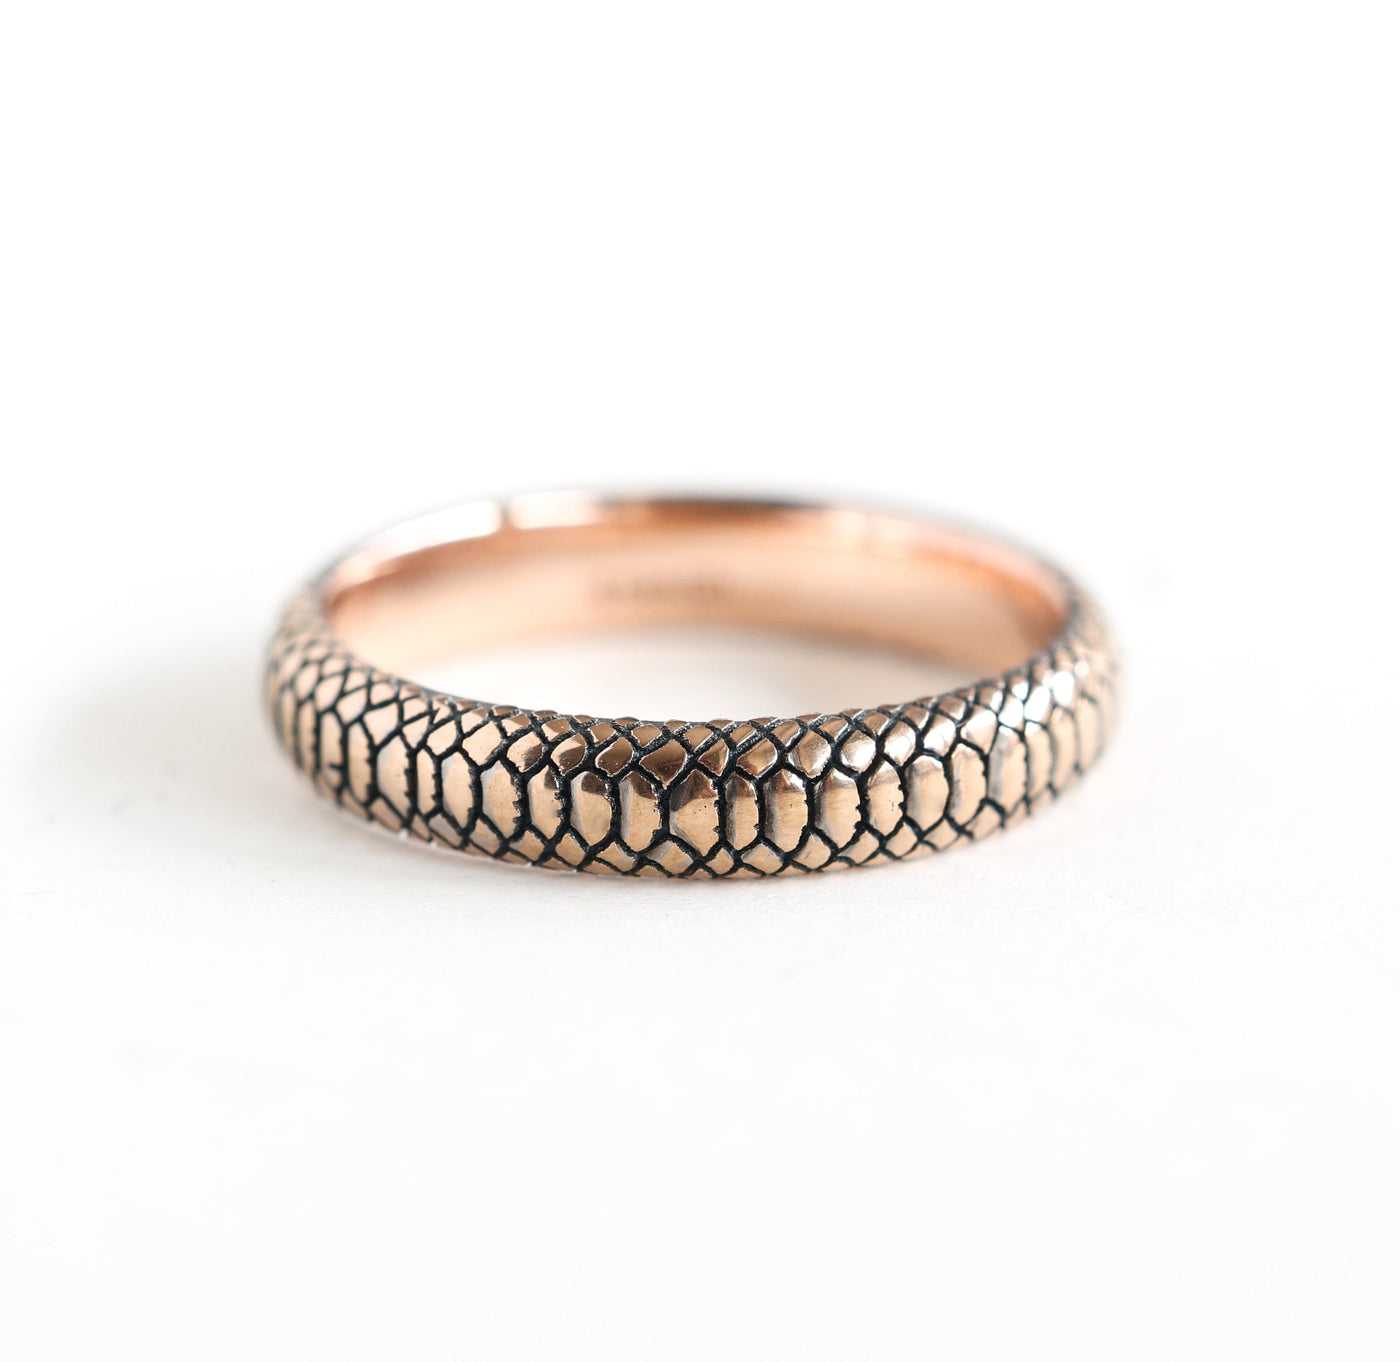 Gold snake textured ring with 3mm-6mm SNAKE band widths in rose gold option.